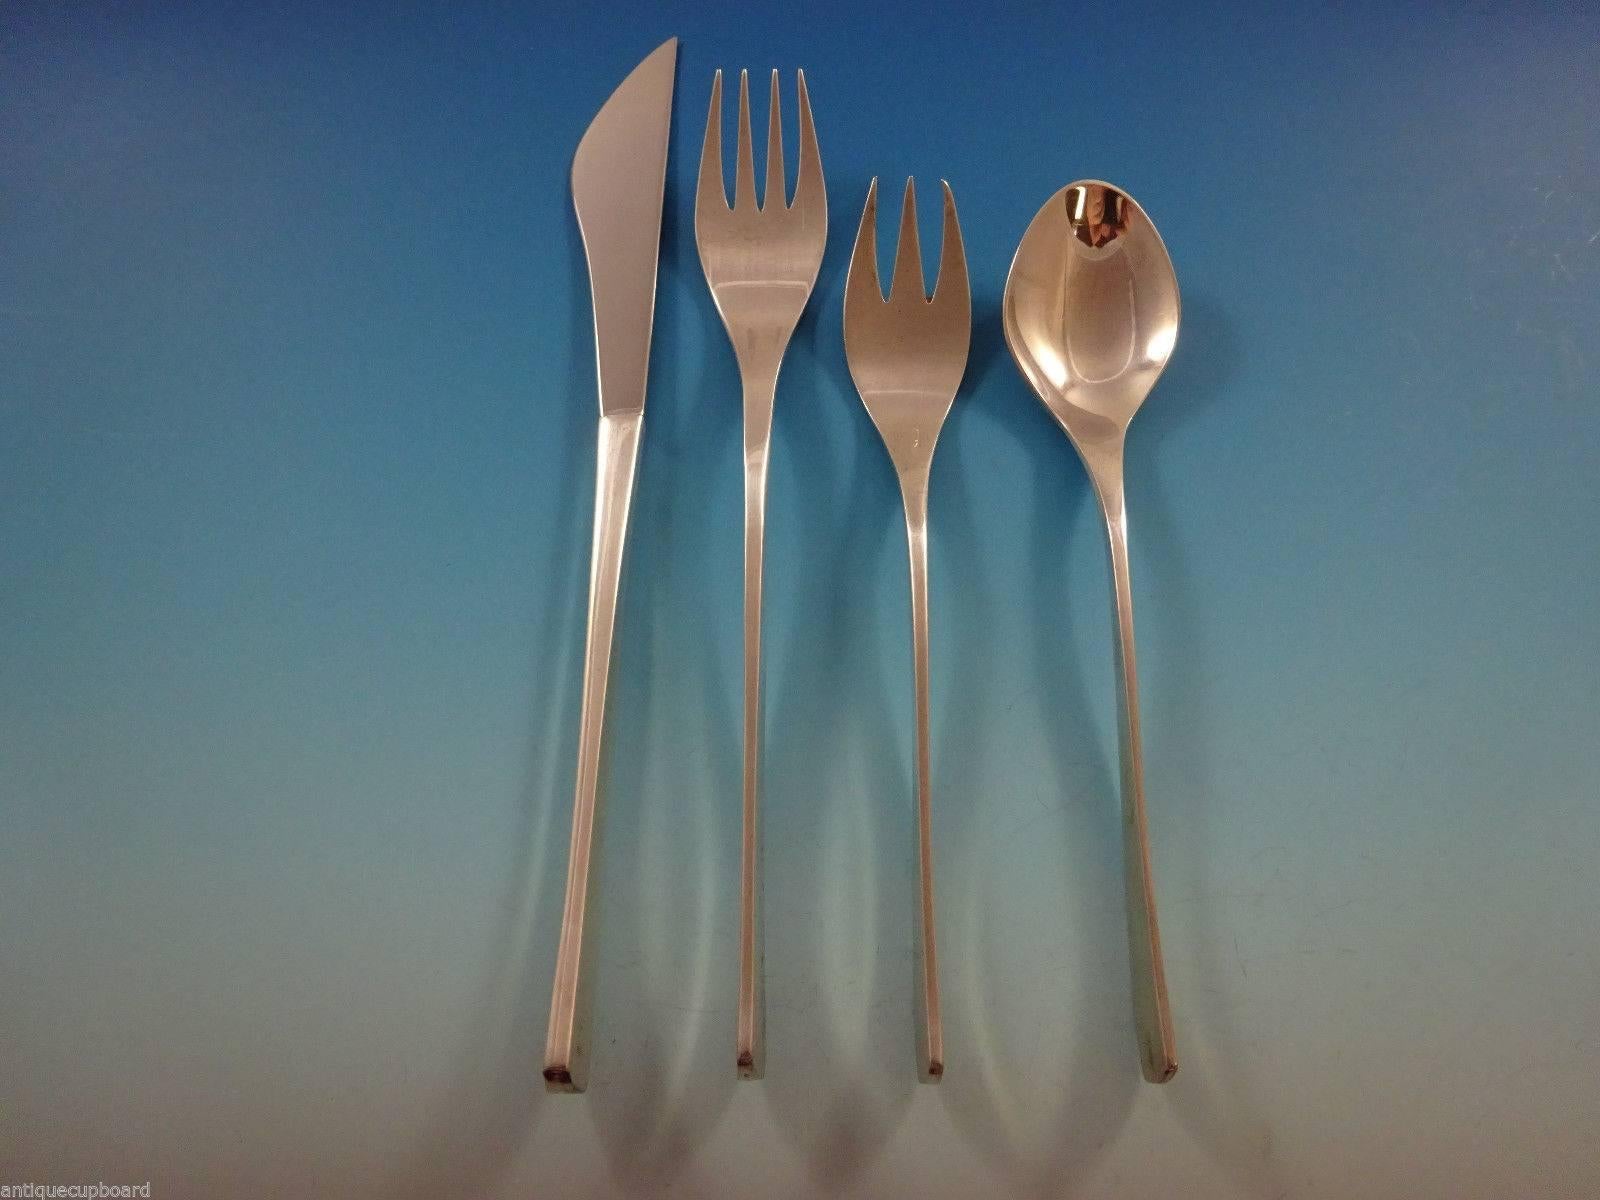 A set of vintage International sterling flatware in the pattern Vision designed by Ronald Hayes Pearson patented in 1961. This discontinued pattern features clean, modernism inspired lines and is featured in the book 